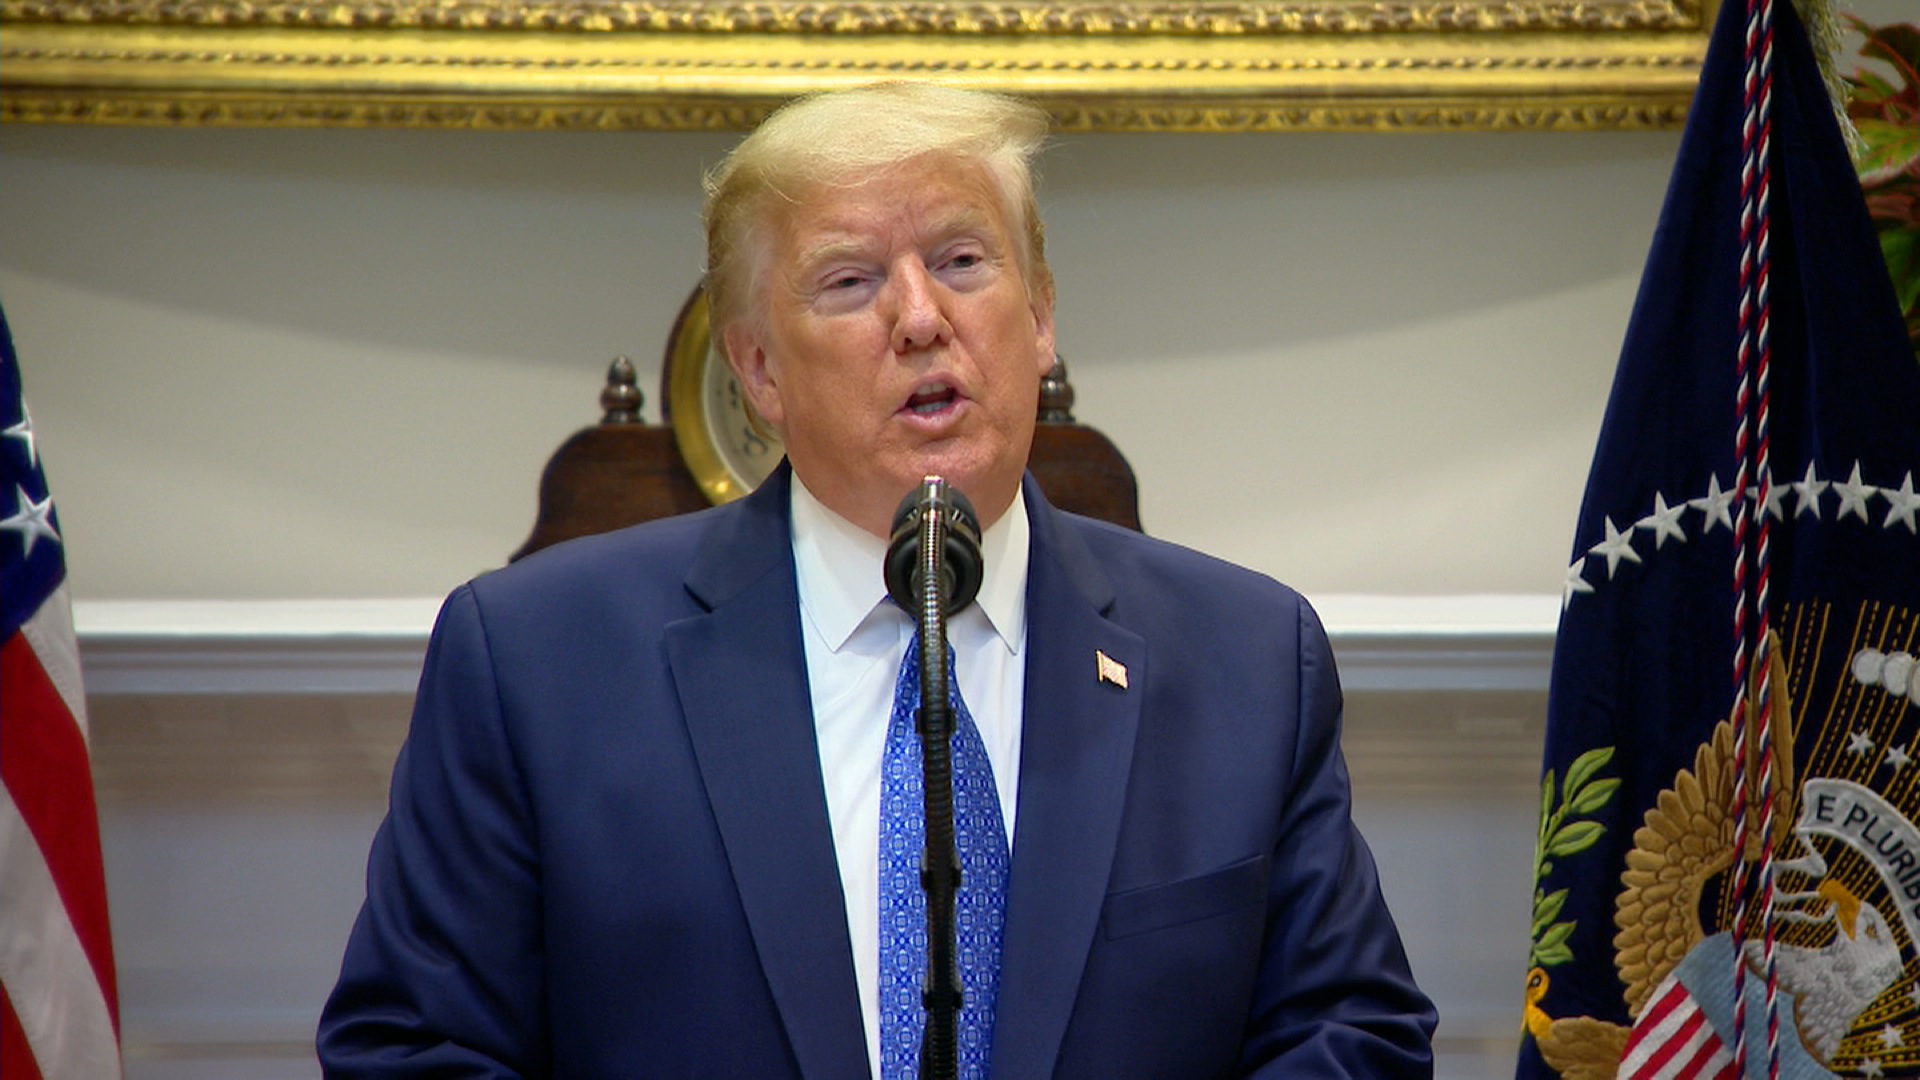 President Trump speaks during a White House ceremony announcing the details of the coronavirus food assistance program in Washington on May 19.